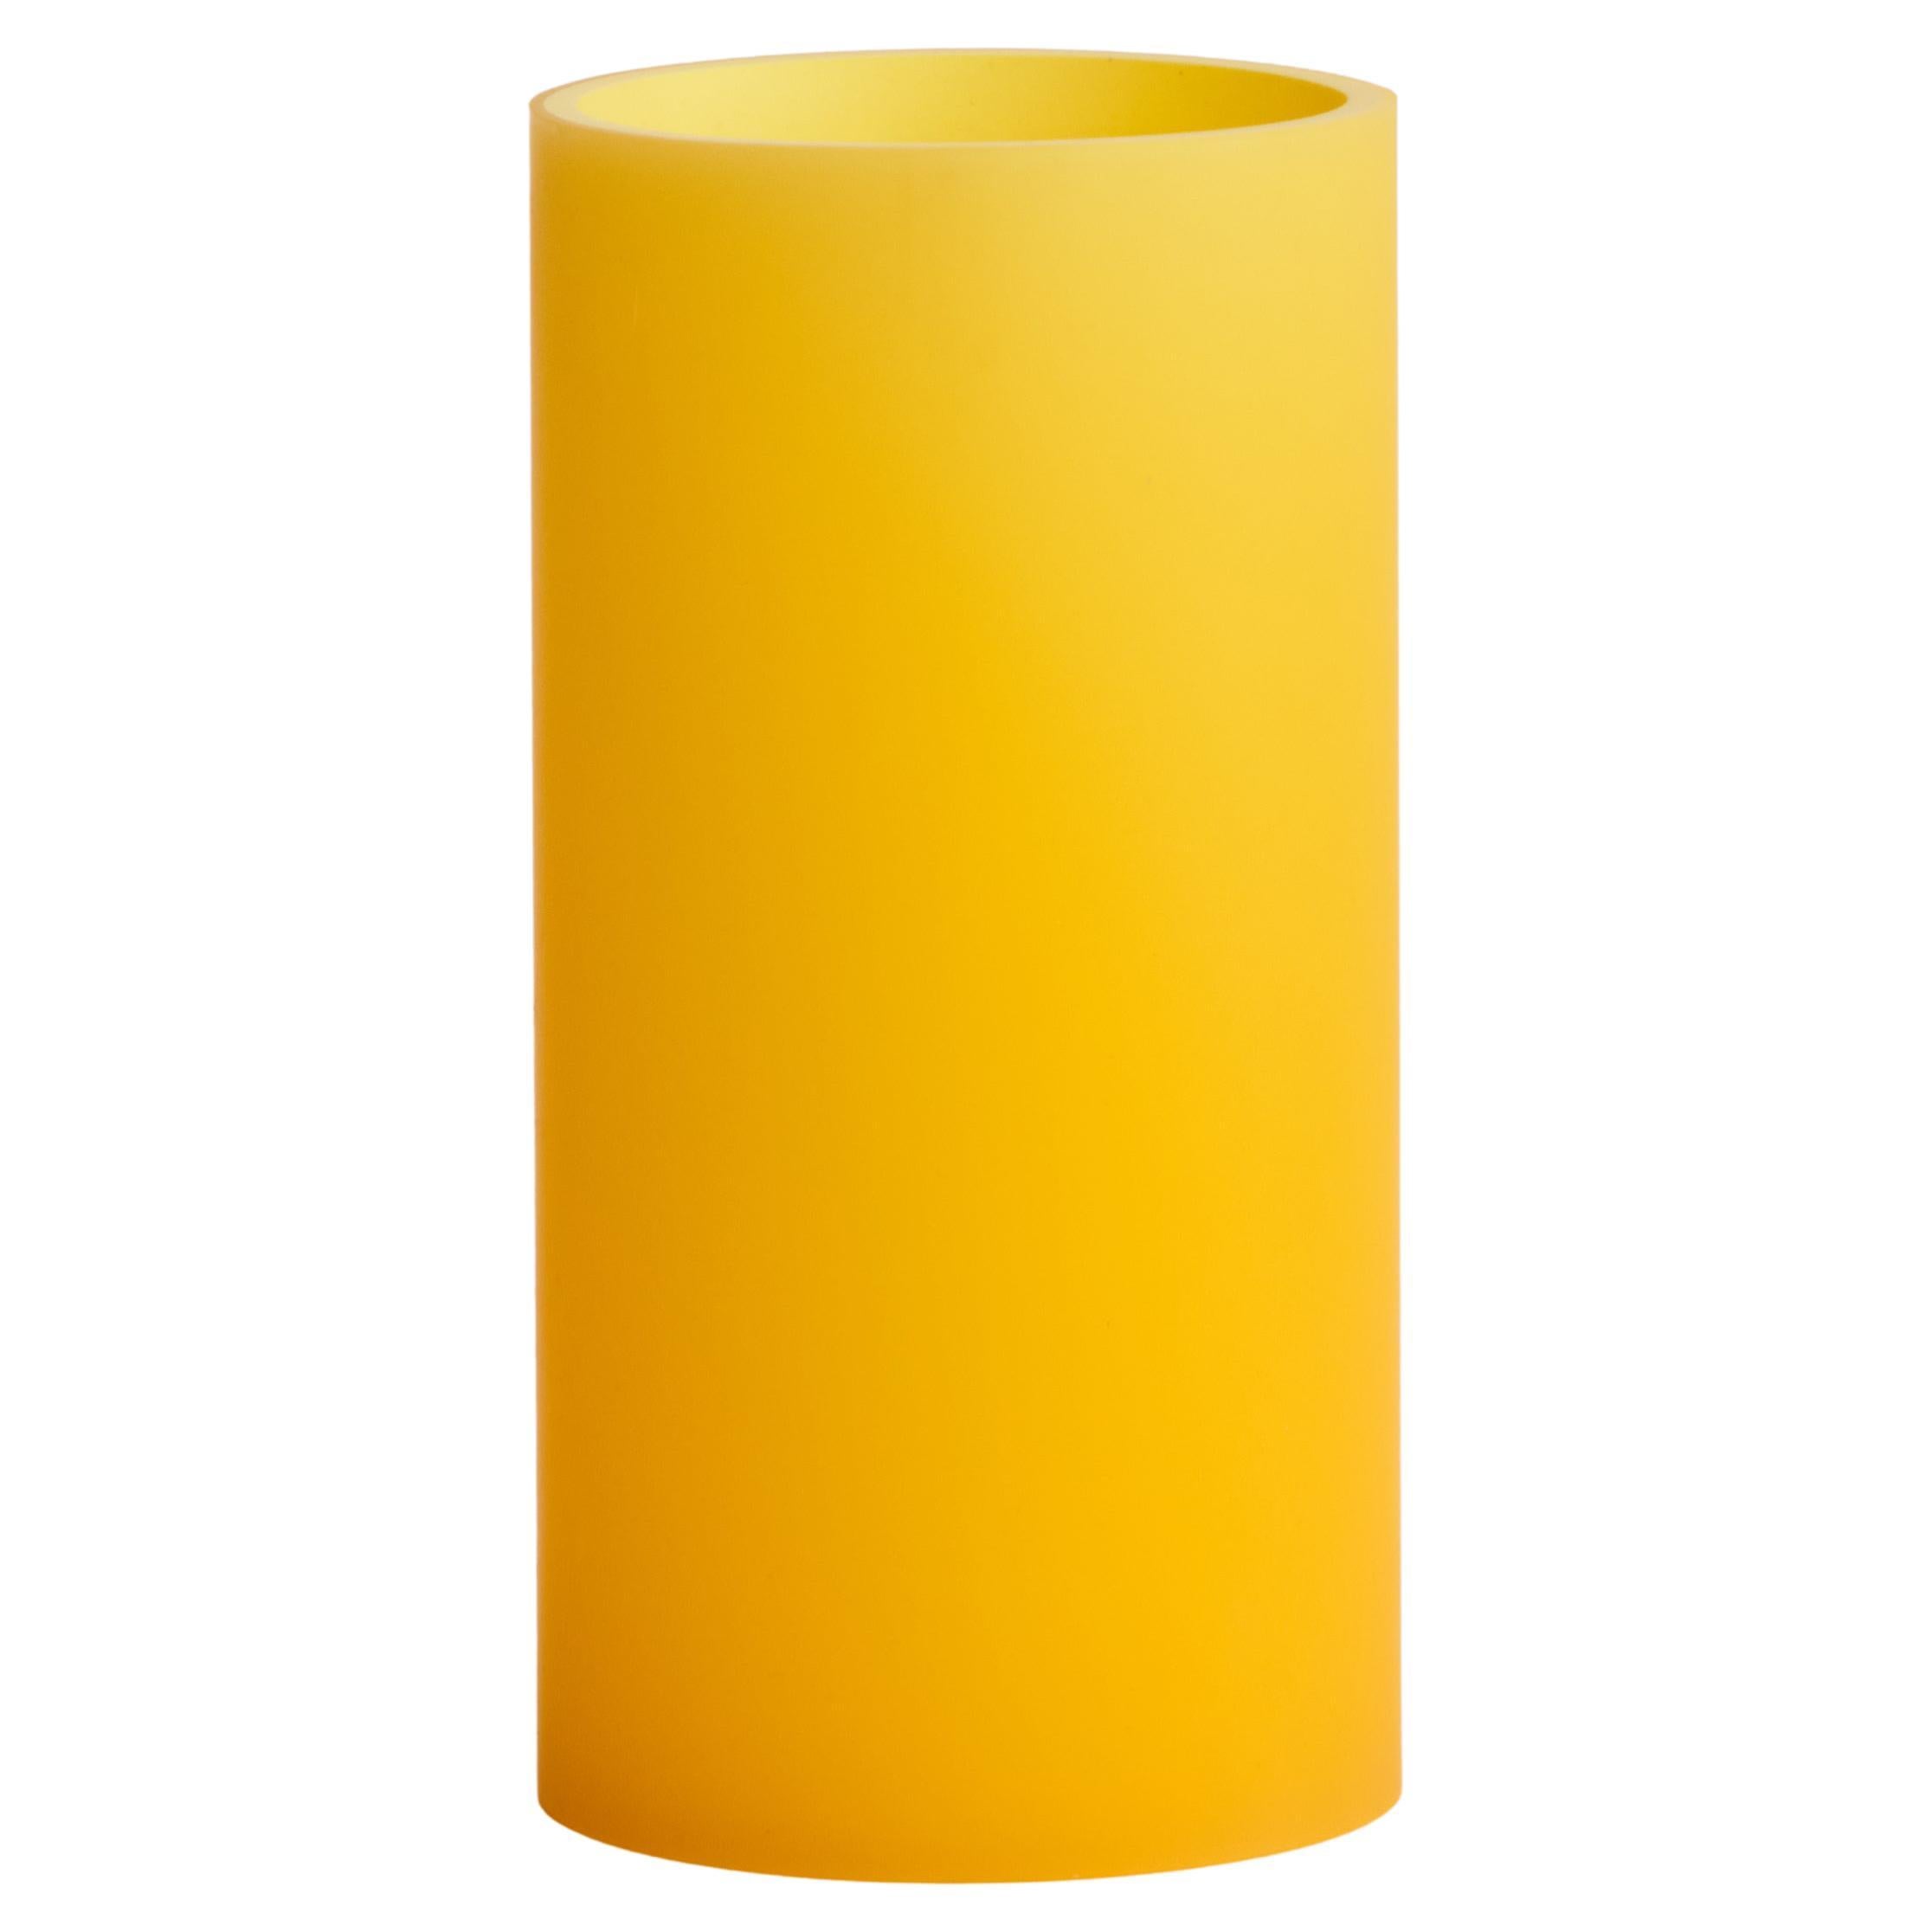 Meld Cylinder Resin Vase/Decor in Yellow by Facture, REP by Tuleste Factory For Sale